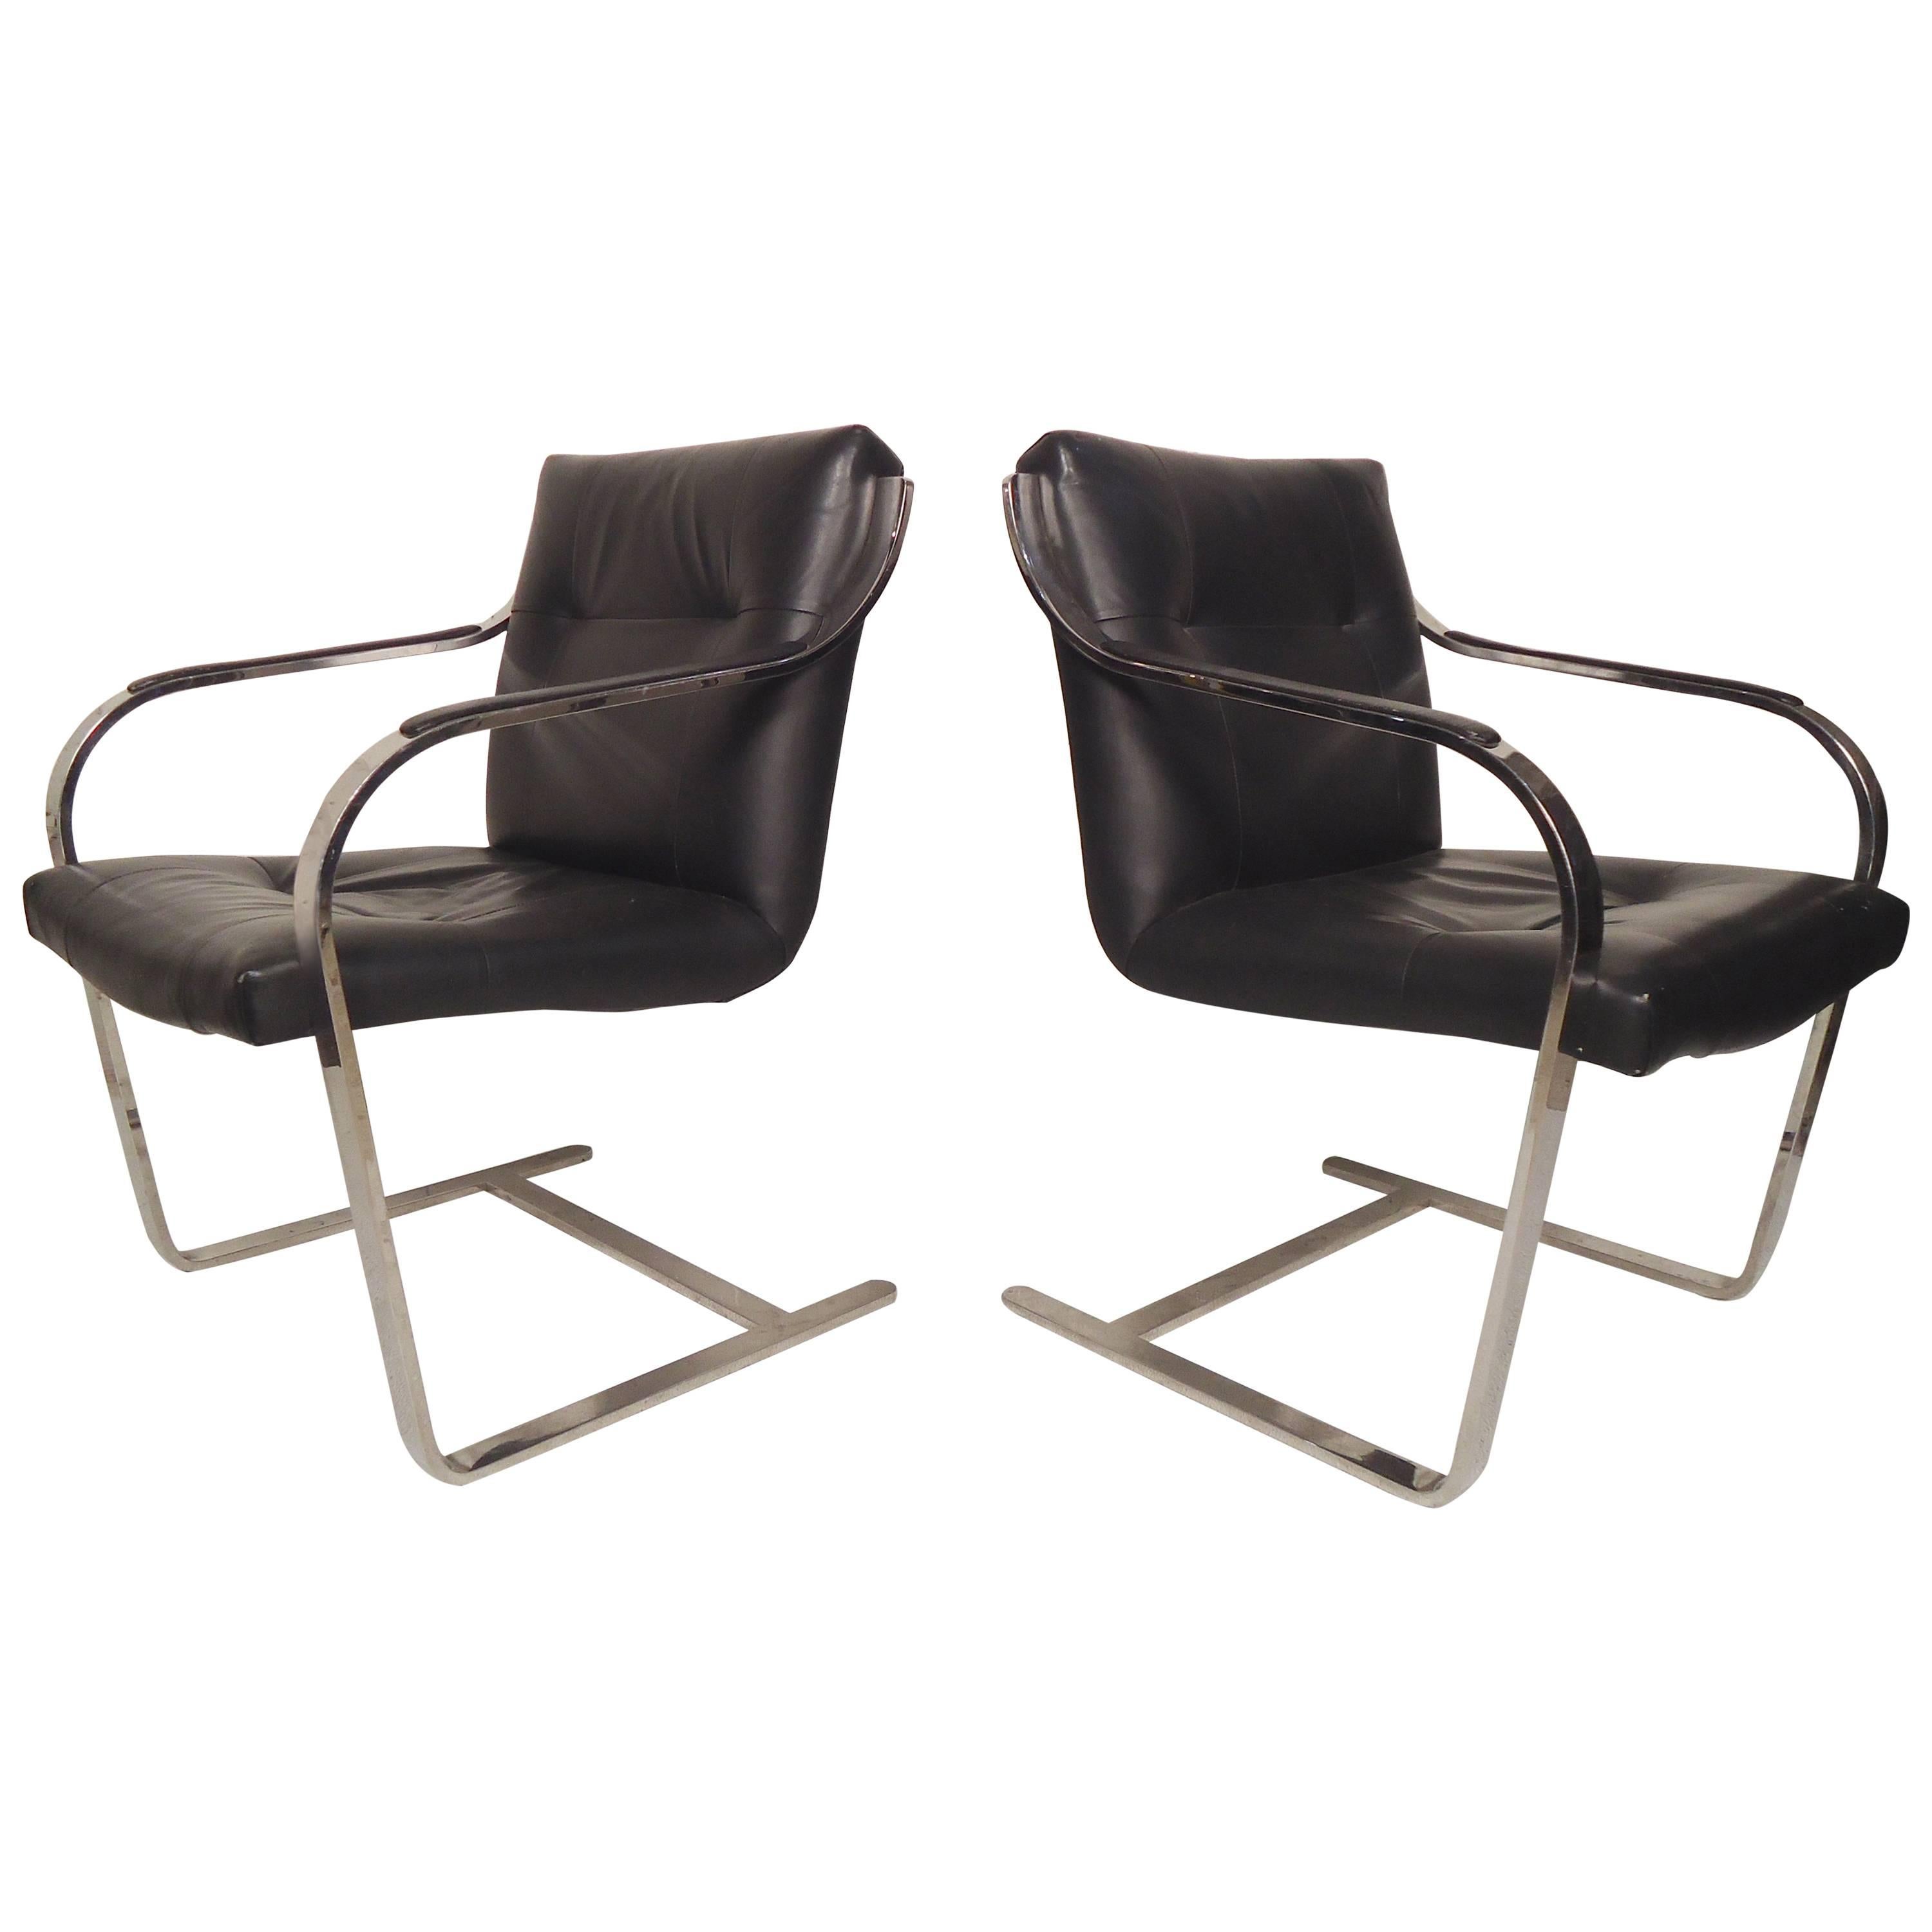 Sleek Midcentury Leather Chrome Chairs For Sale